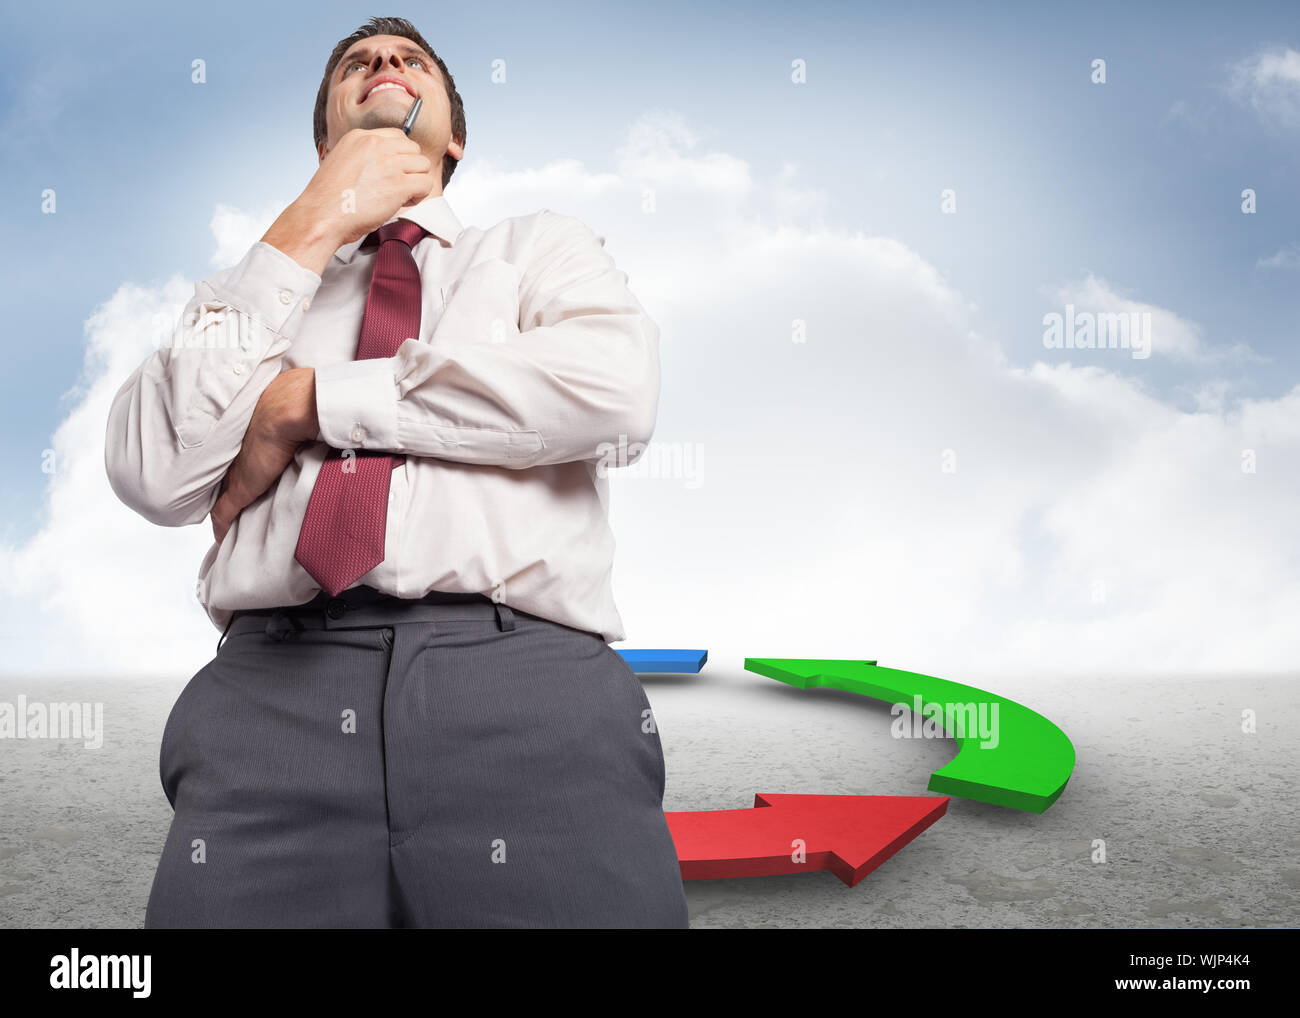 Thoughtful businessman holding pen to chin against blue red and green arrows in desert landscape Stock Photo